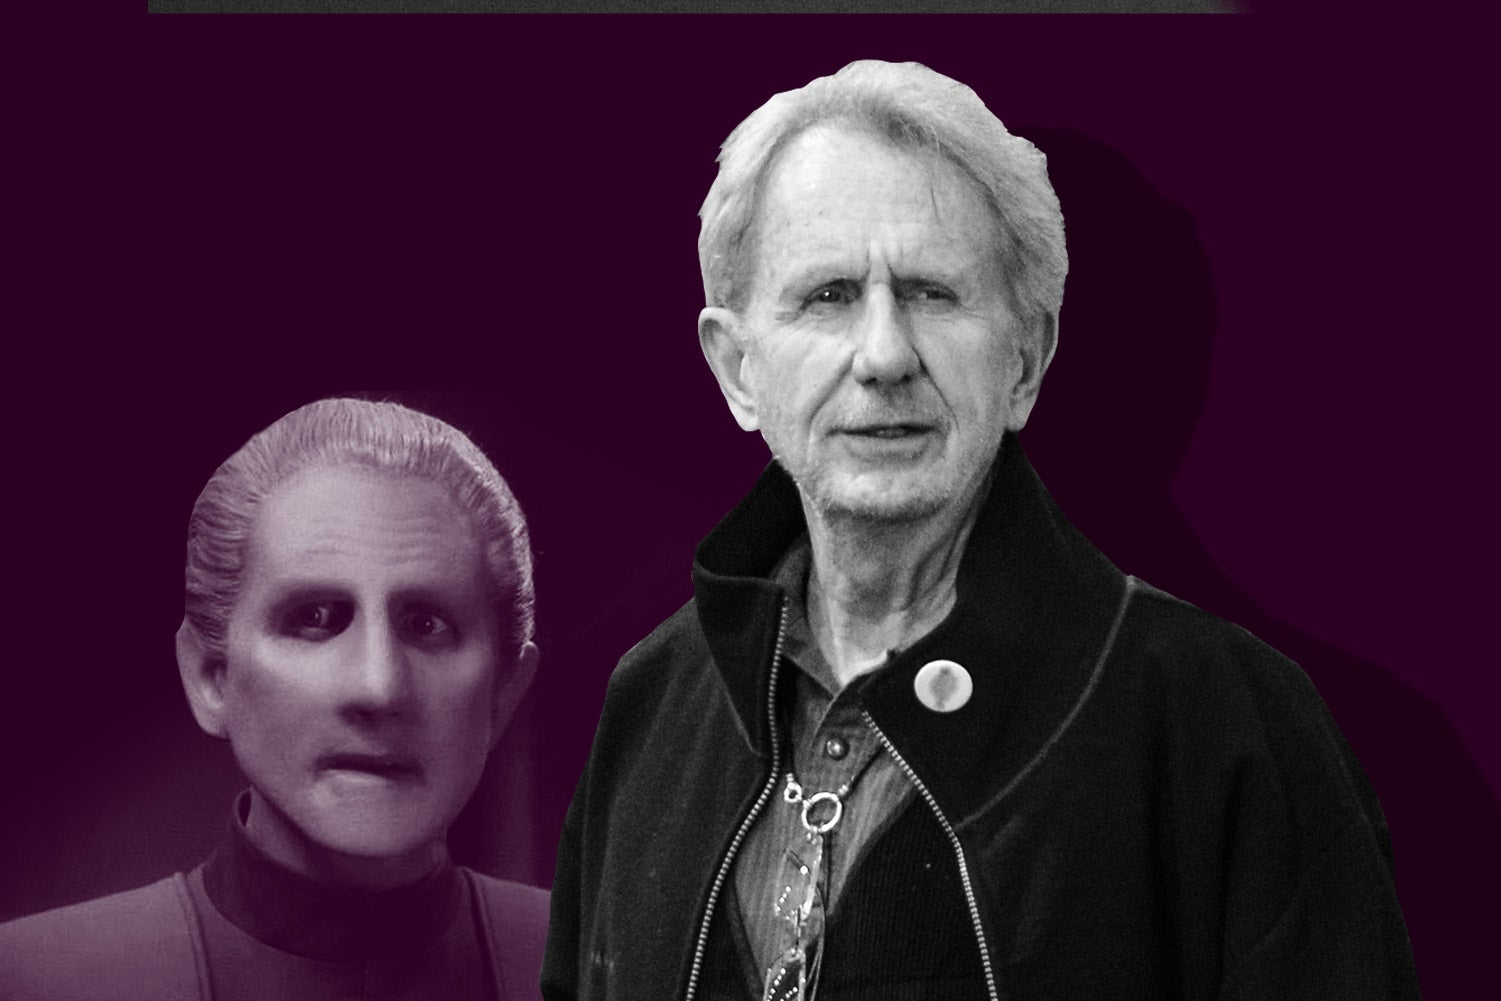 An illustration of René Auberjonois in front of his character Odo, who has smoothed-out facial features and slicked-back hair.